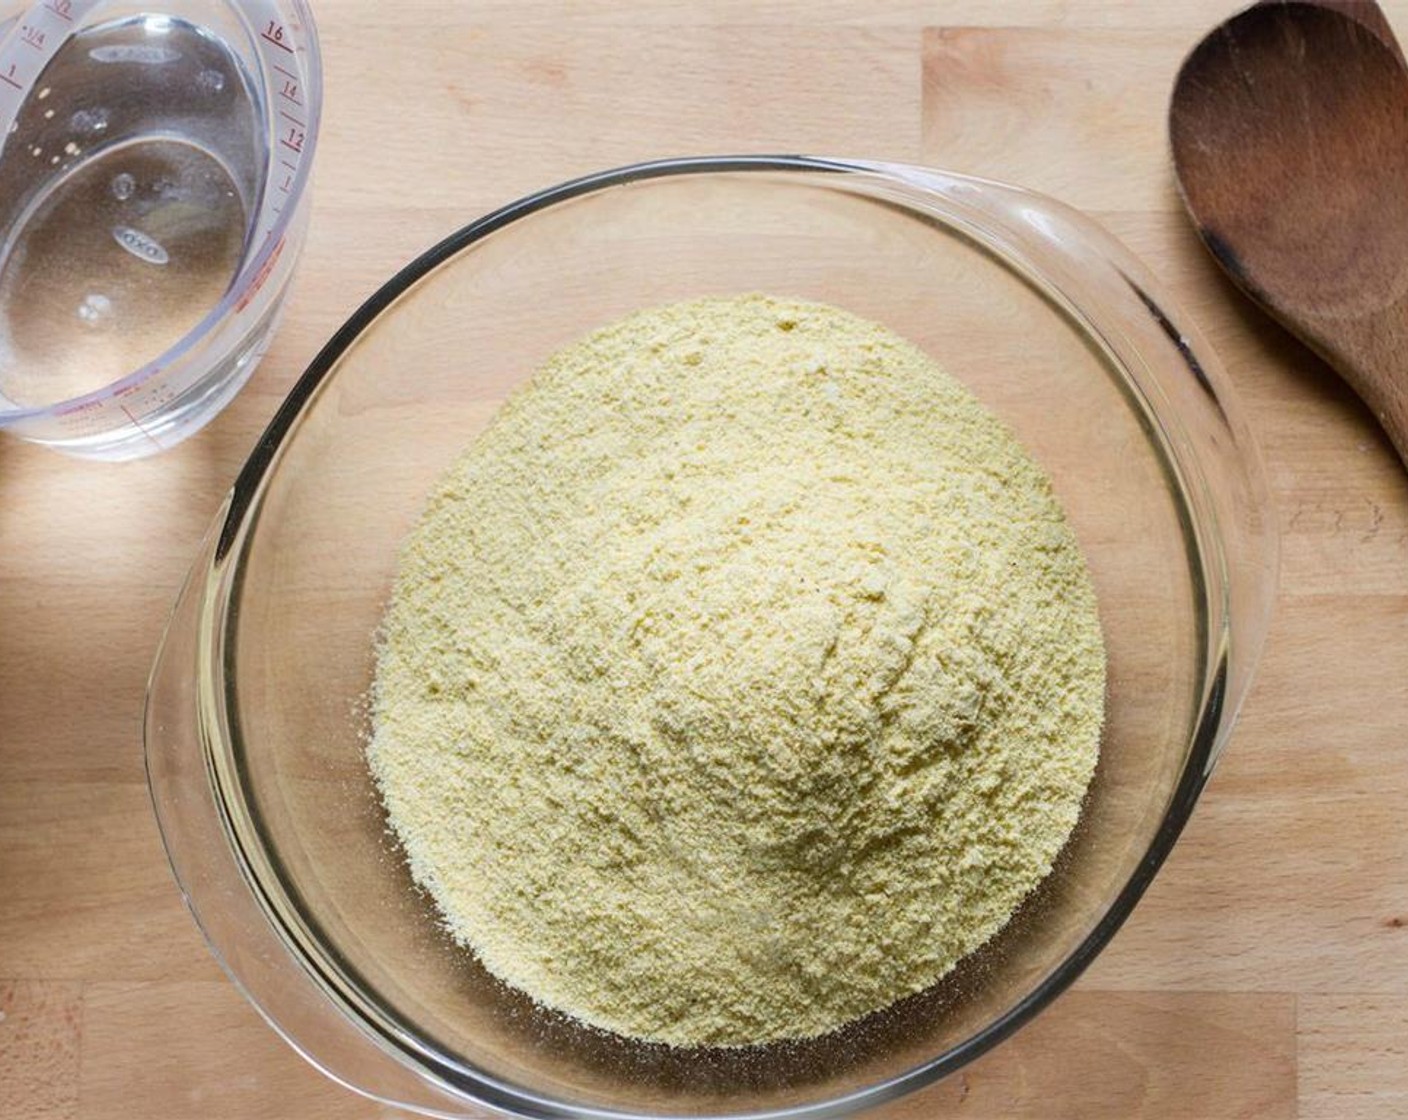 step 1 Place the Corn Masa Flour (2 cups) in a mixing bowl and dissolve the Salt (1/2 tsp) in 1 cup of hot water.